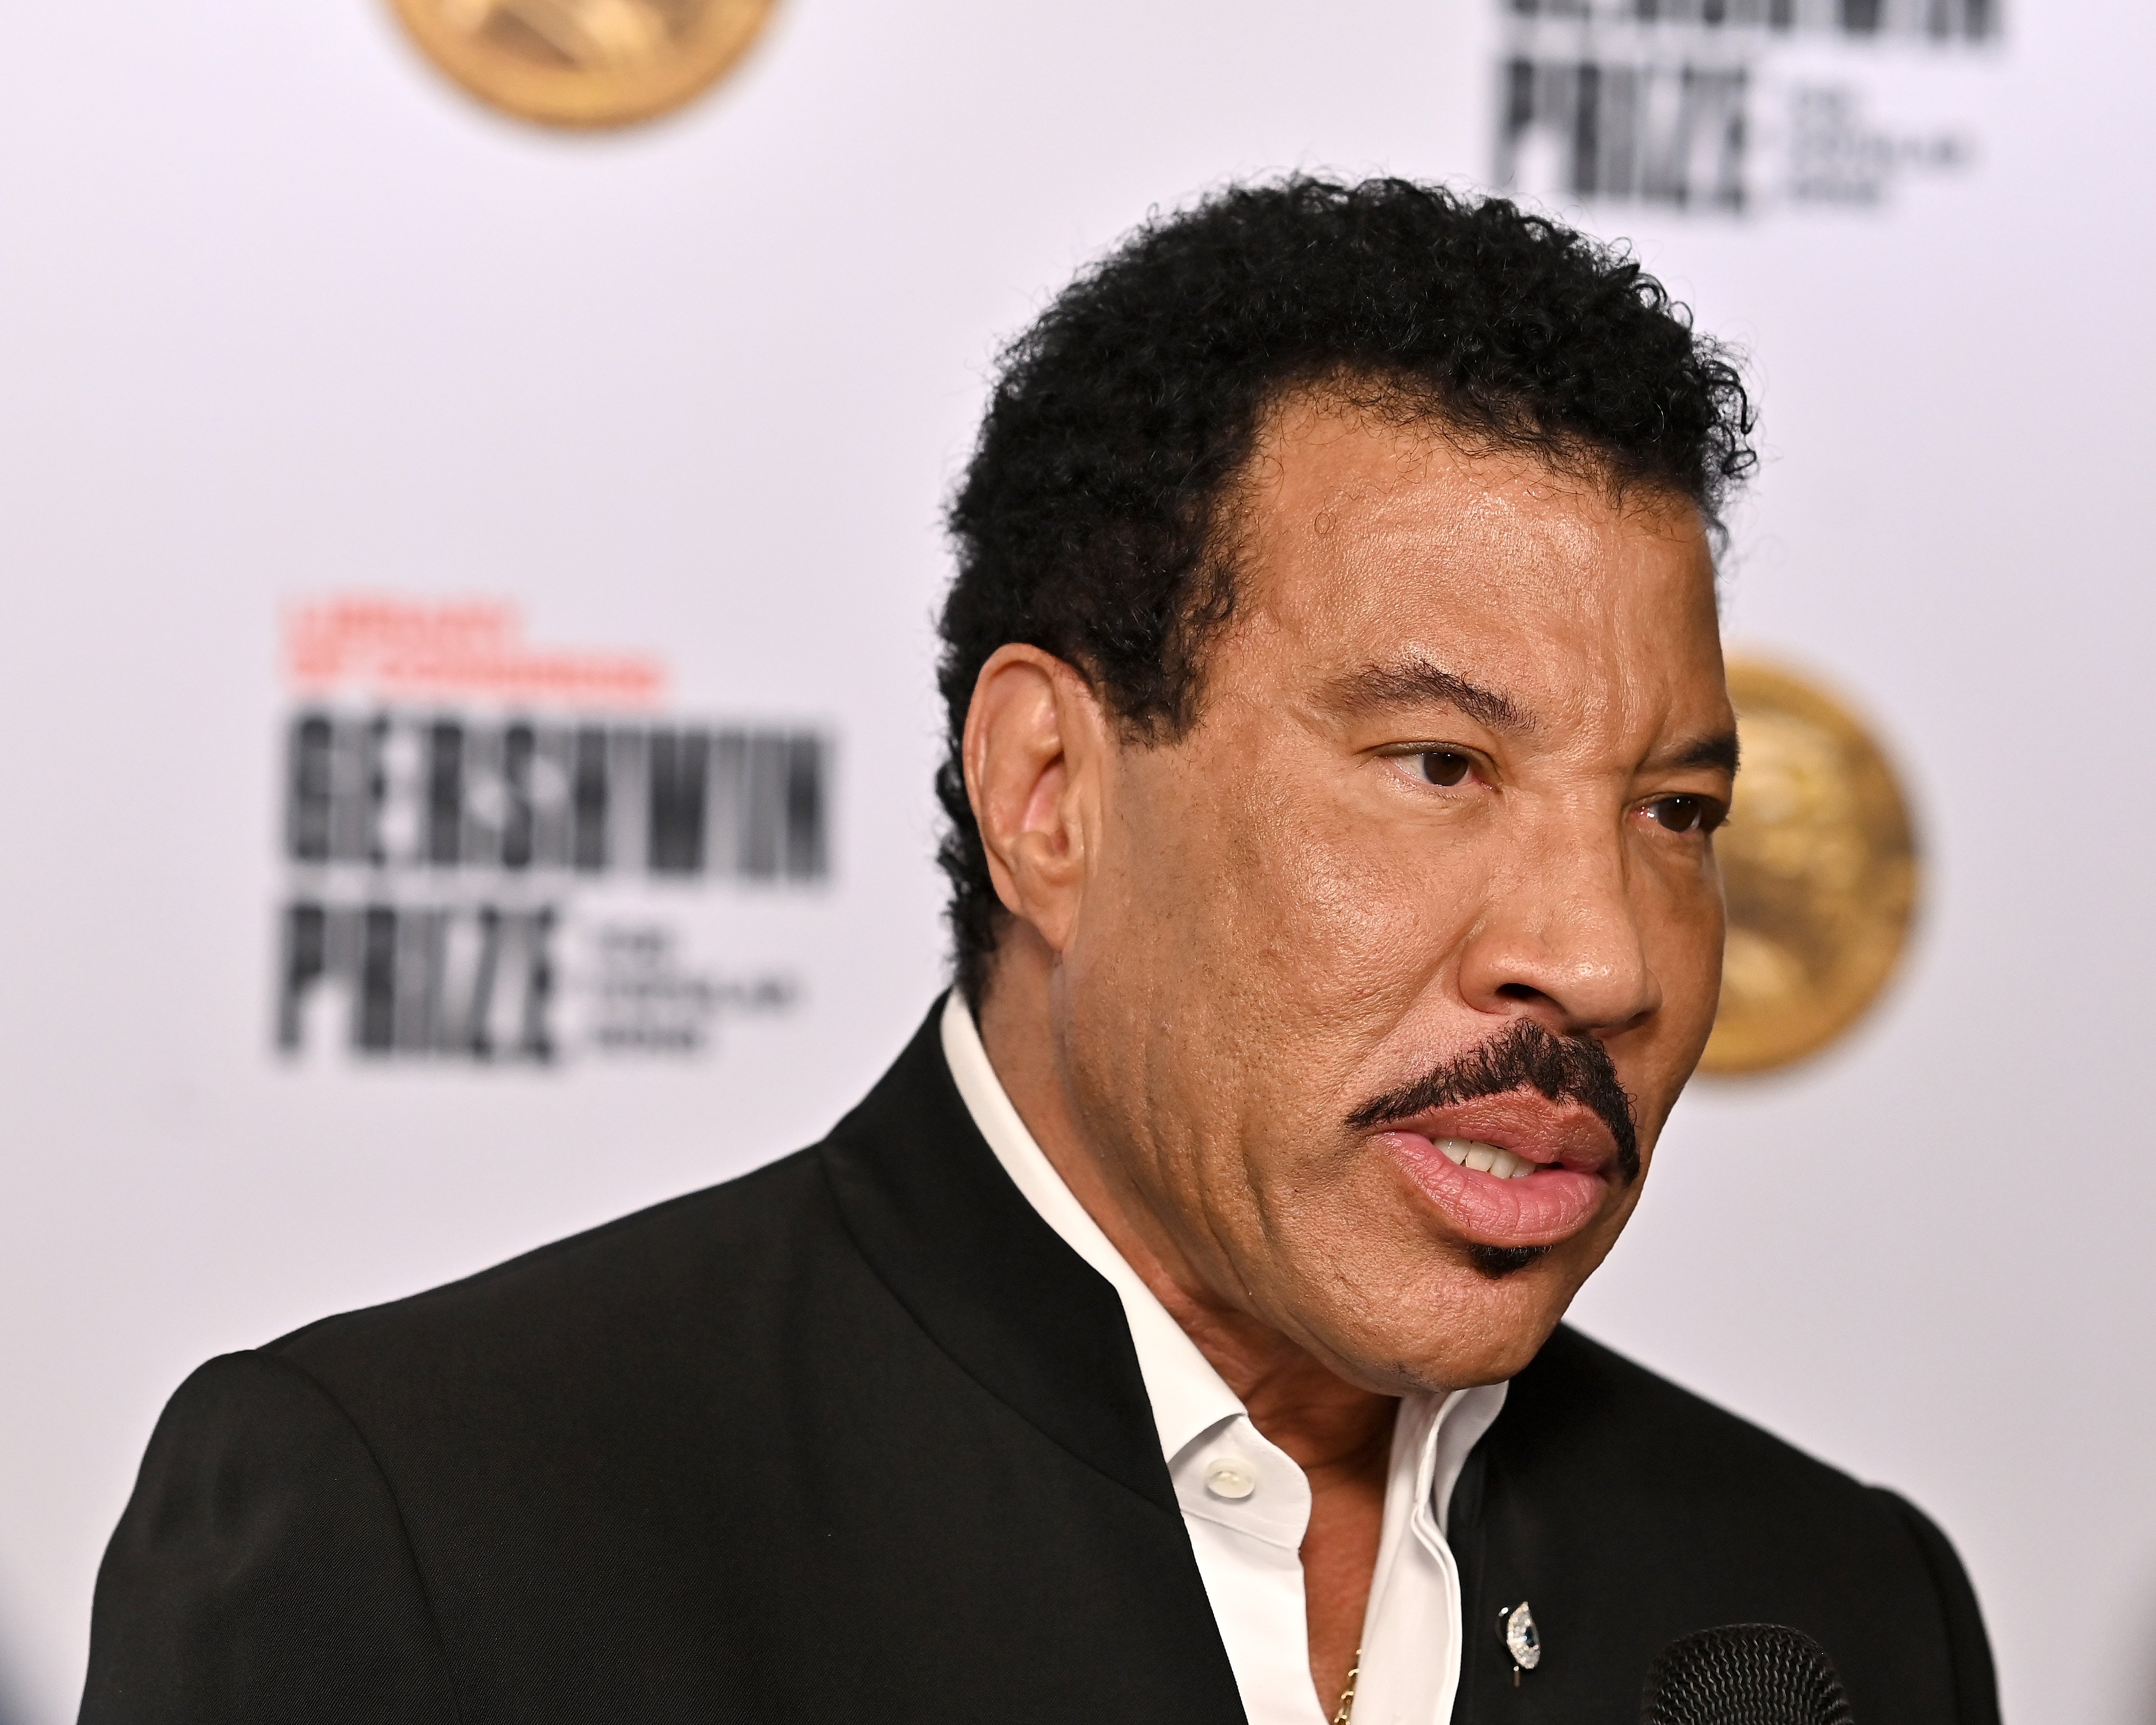 Lionel Richie attending the Library of Congress Gershwin Prize for Popular Song concert at DAR Constitution Hall on March 09, 2022 in Washington, DC. / Source: Getty Images